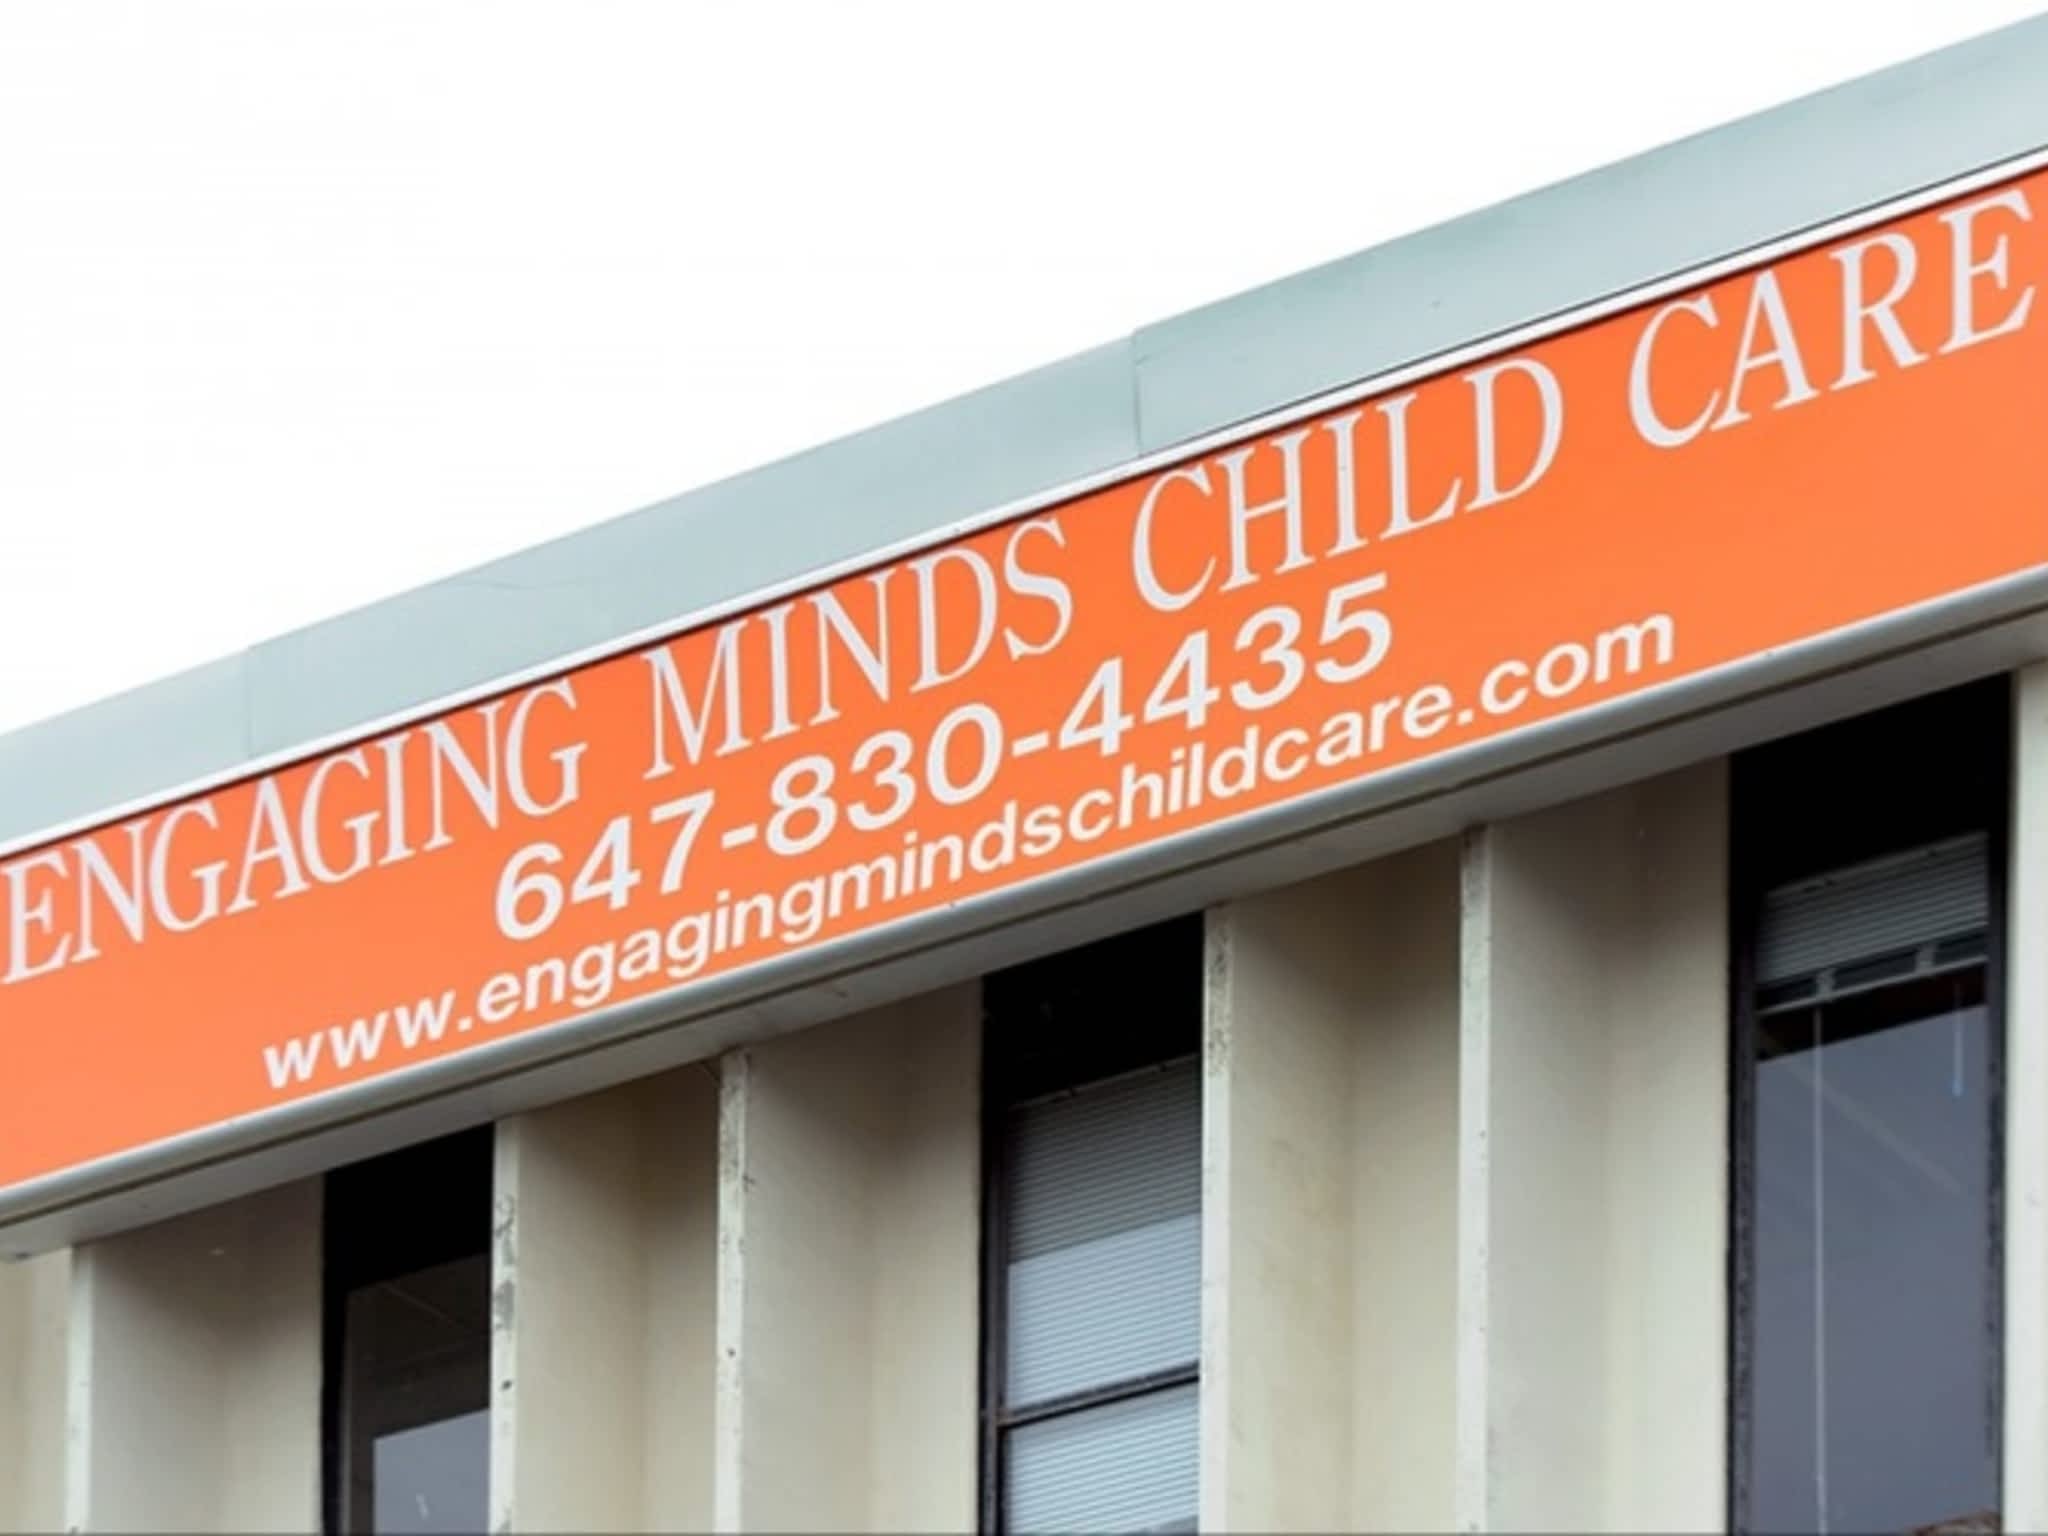 photo Engaging Minds Child Care